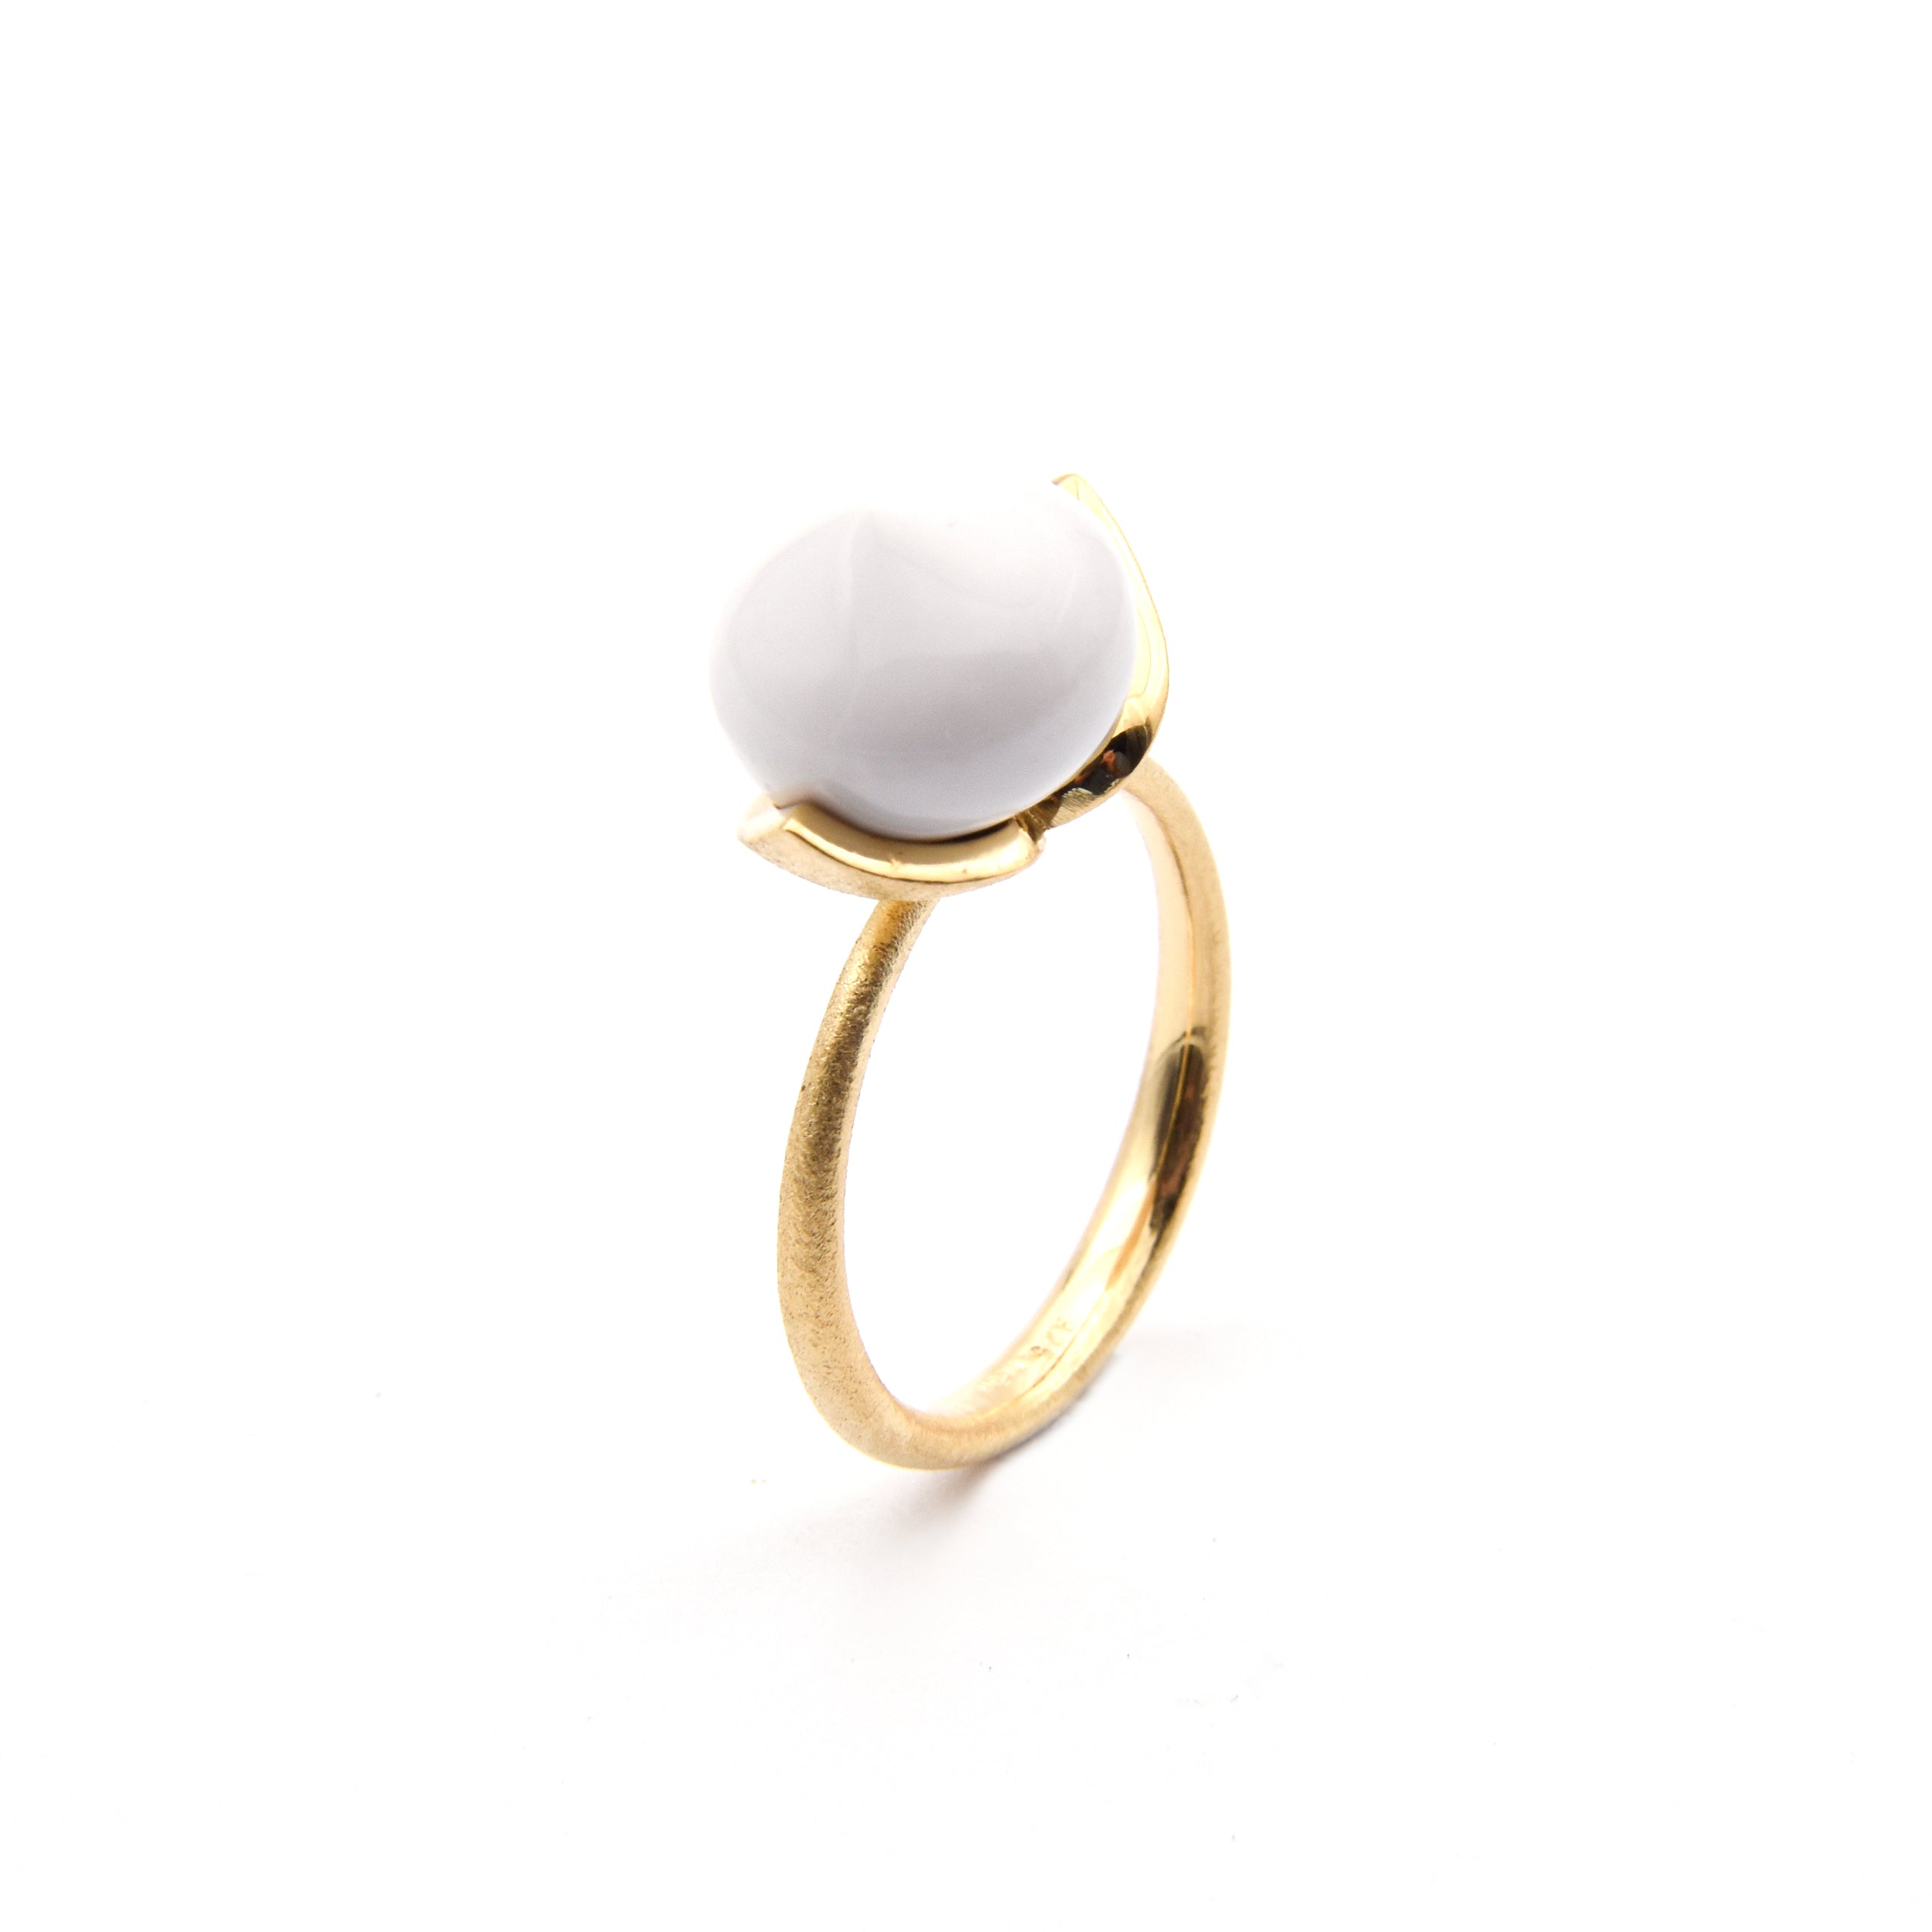 Dolce ring "medium" with Kascholong 925/-